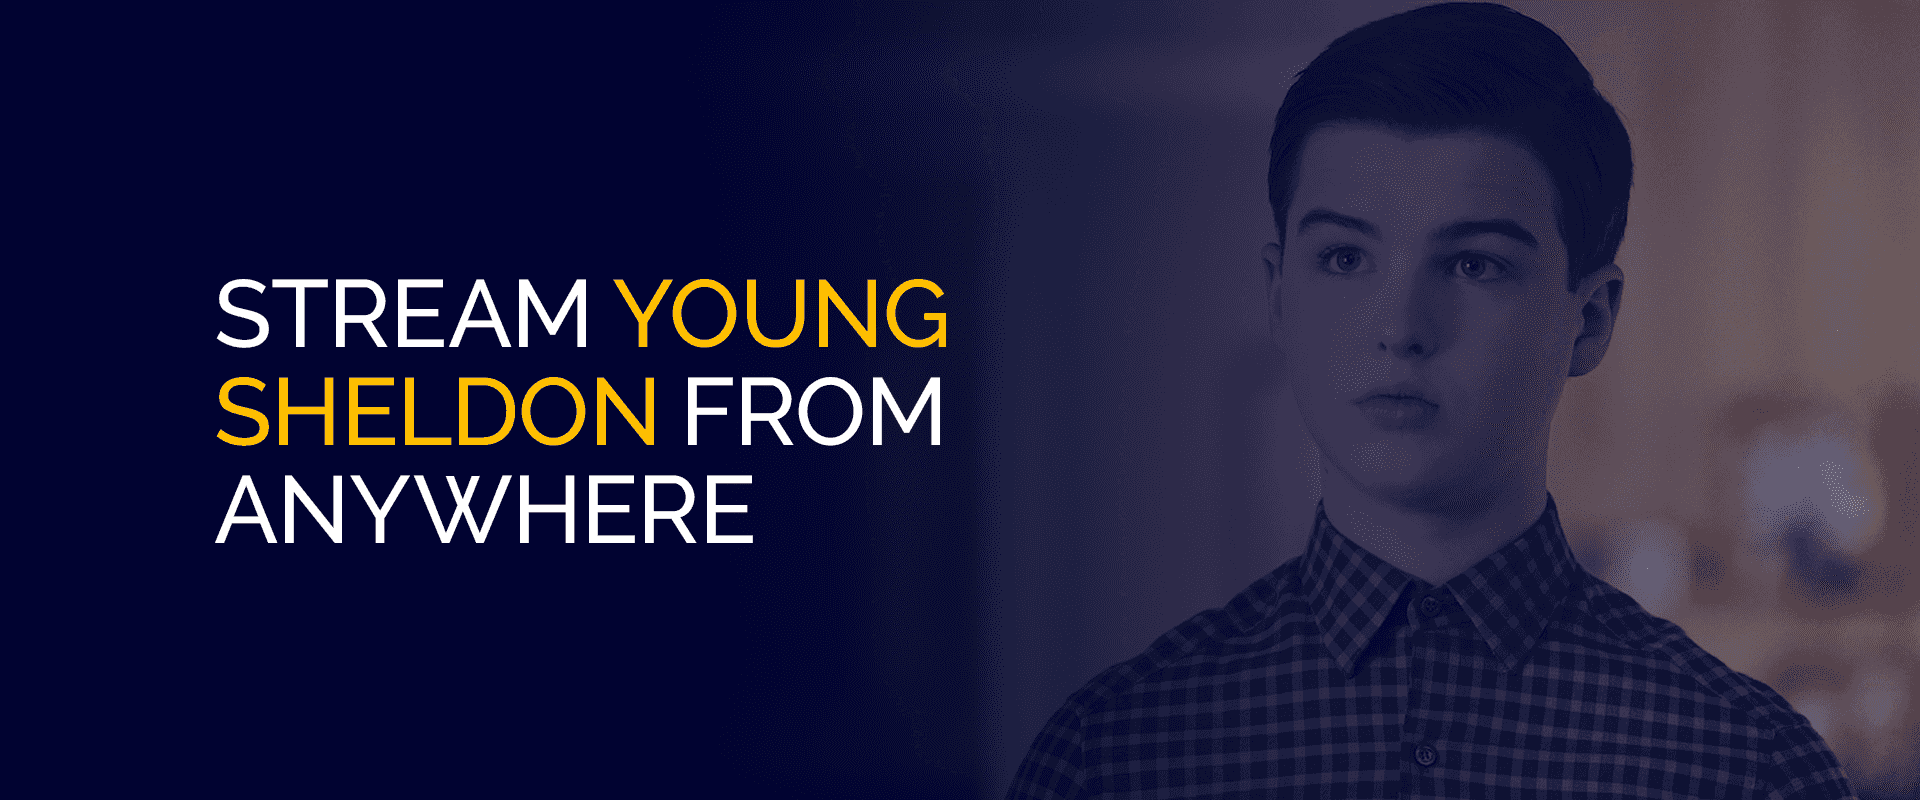 Stream Young Sheldon from Anywhere